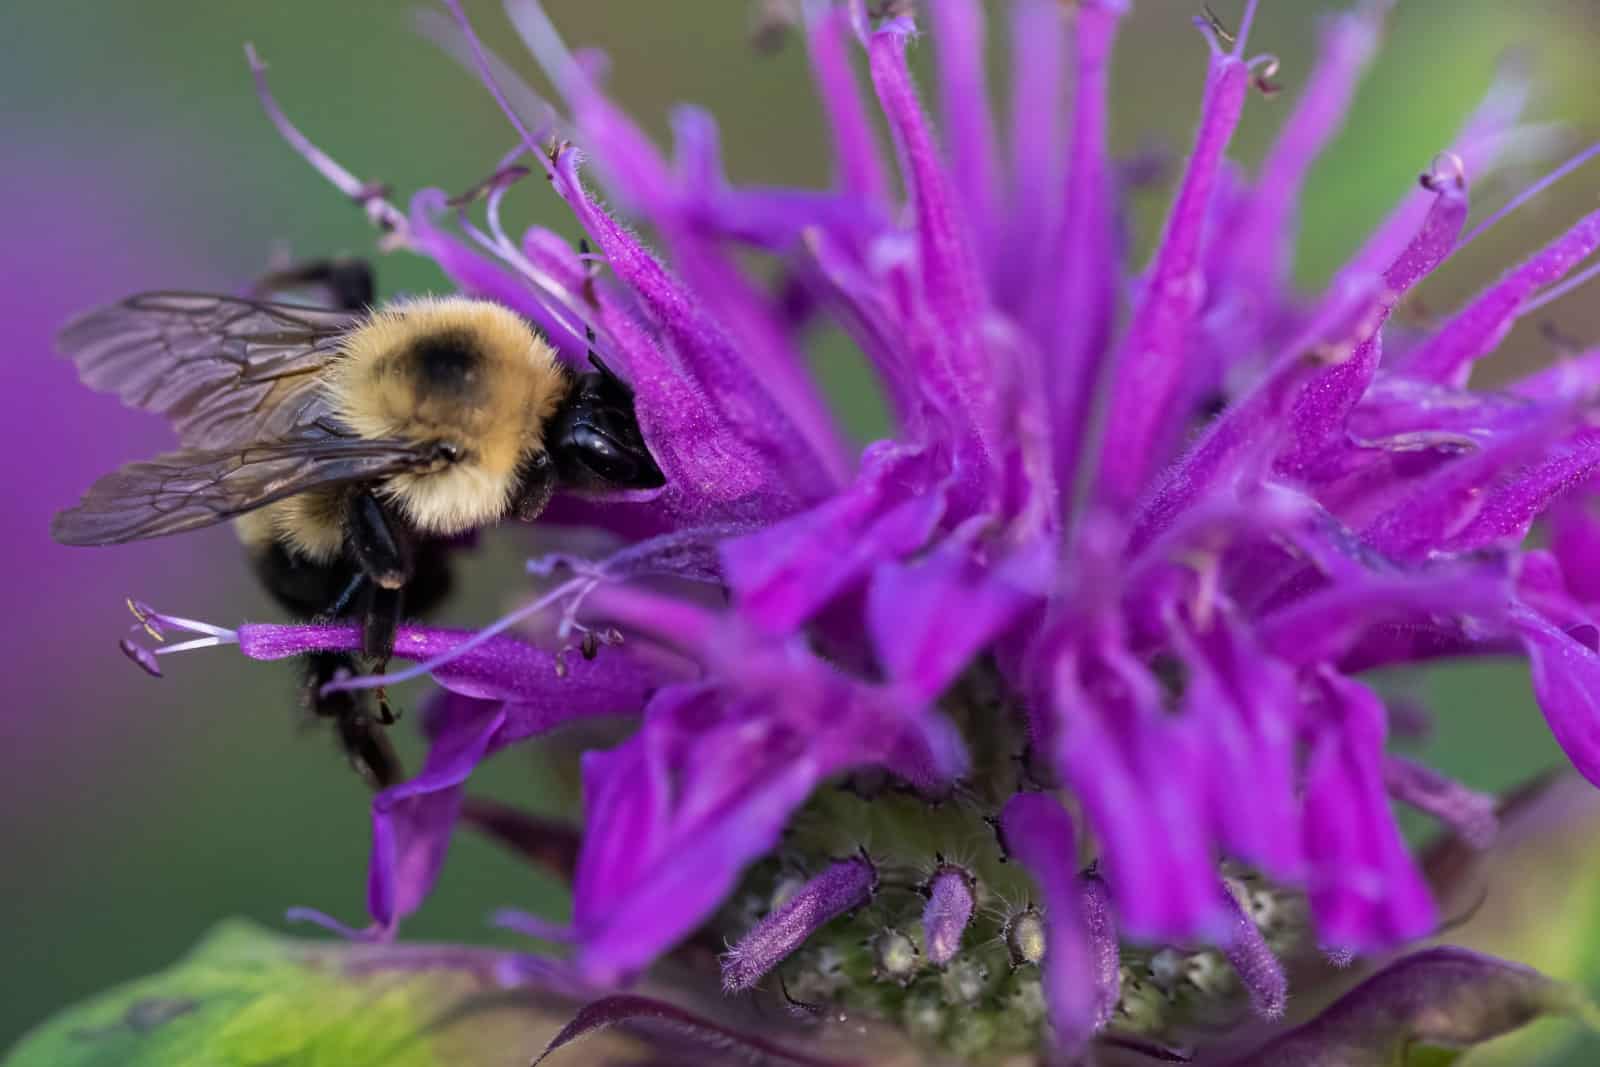 A common eastern bumblebee gathering nectar from bee balm